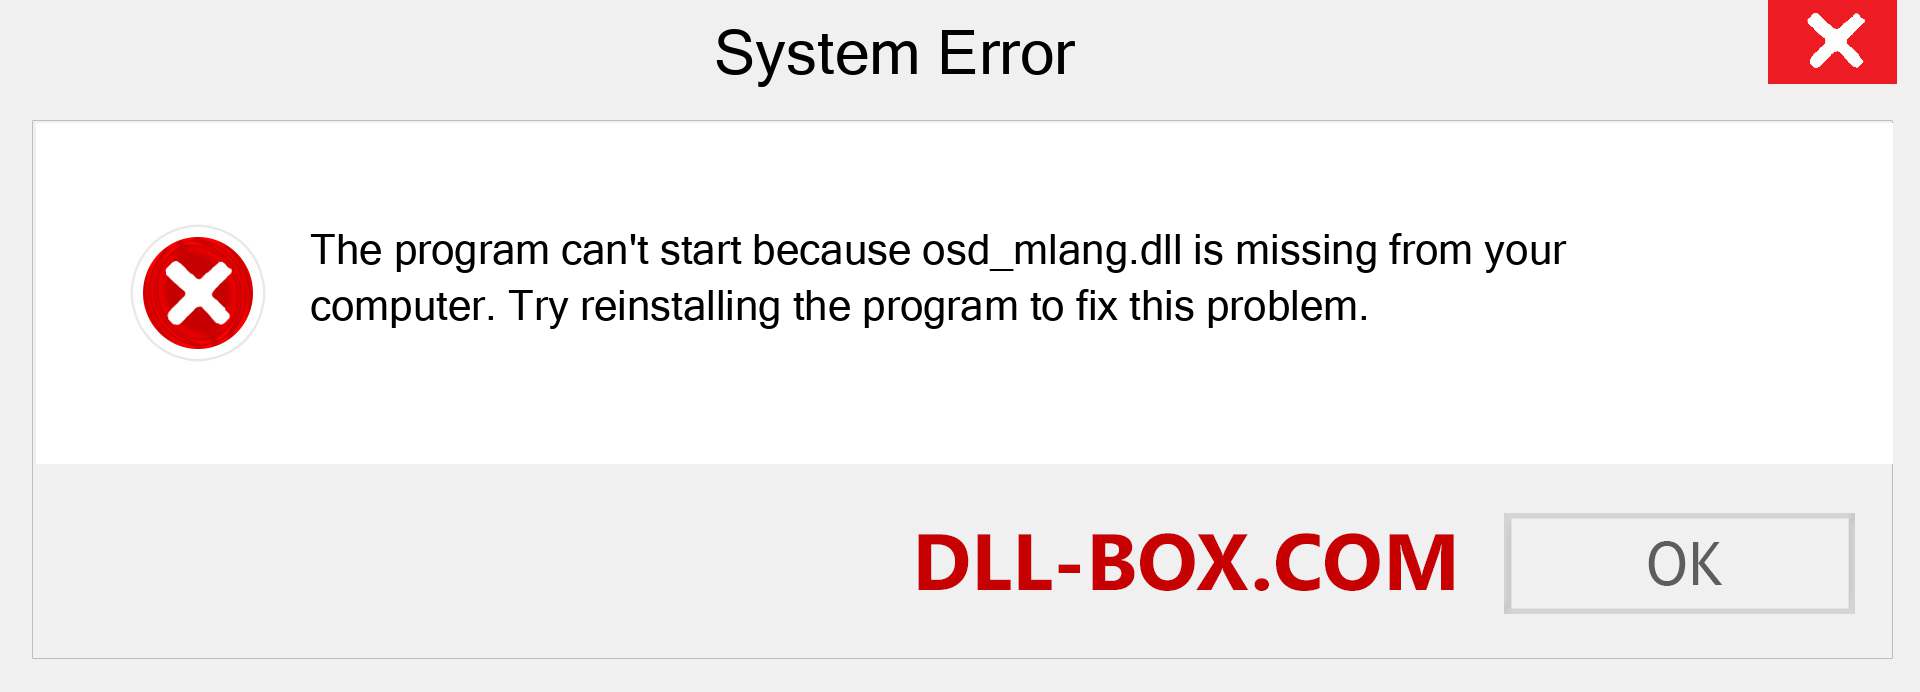  osd_mlang.dll file is missing?. Download for Windows 7, 8, 10 - Fix  osd_mlang dll Missing Error on Windows, photos, images